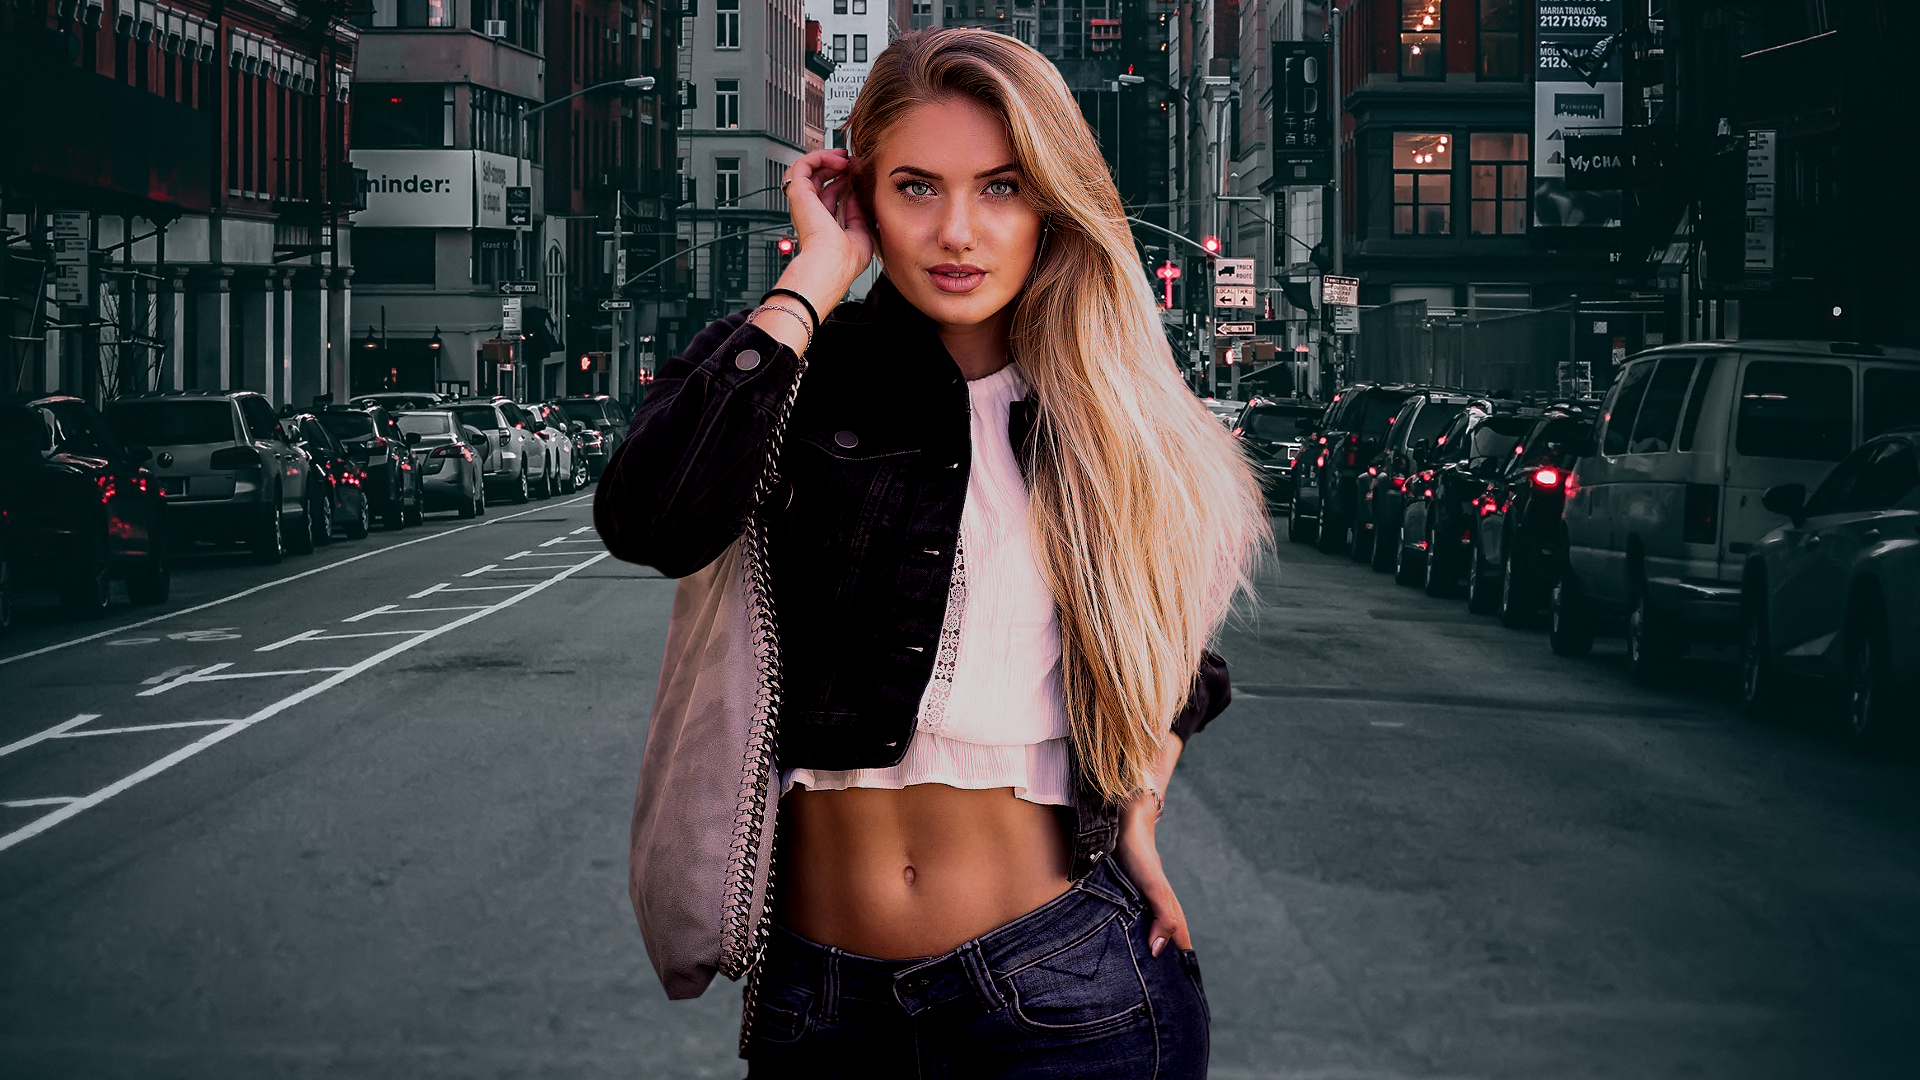 People 1920x1080 Alica Schmidt women athletes blonde long hair belly button denim jacket jeans bag city road looking at viewer Composite women outdoors bare midriff frontal view